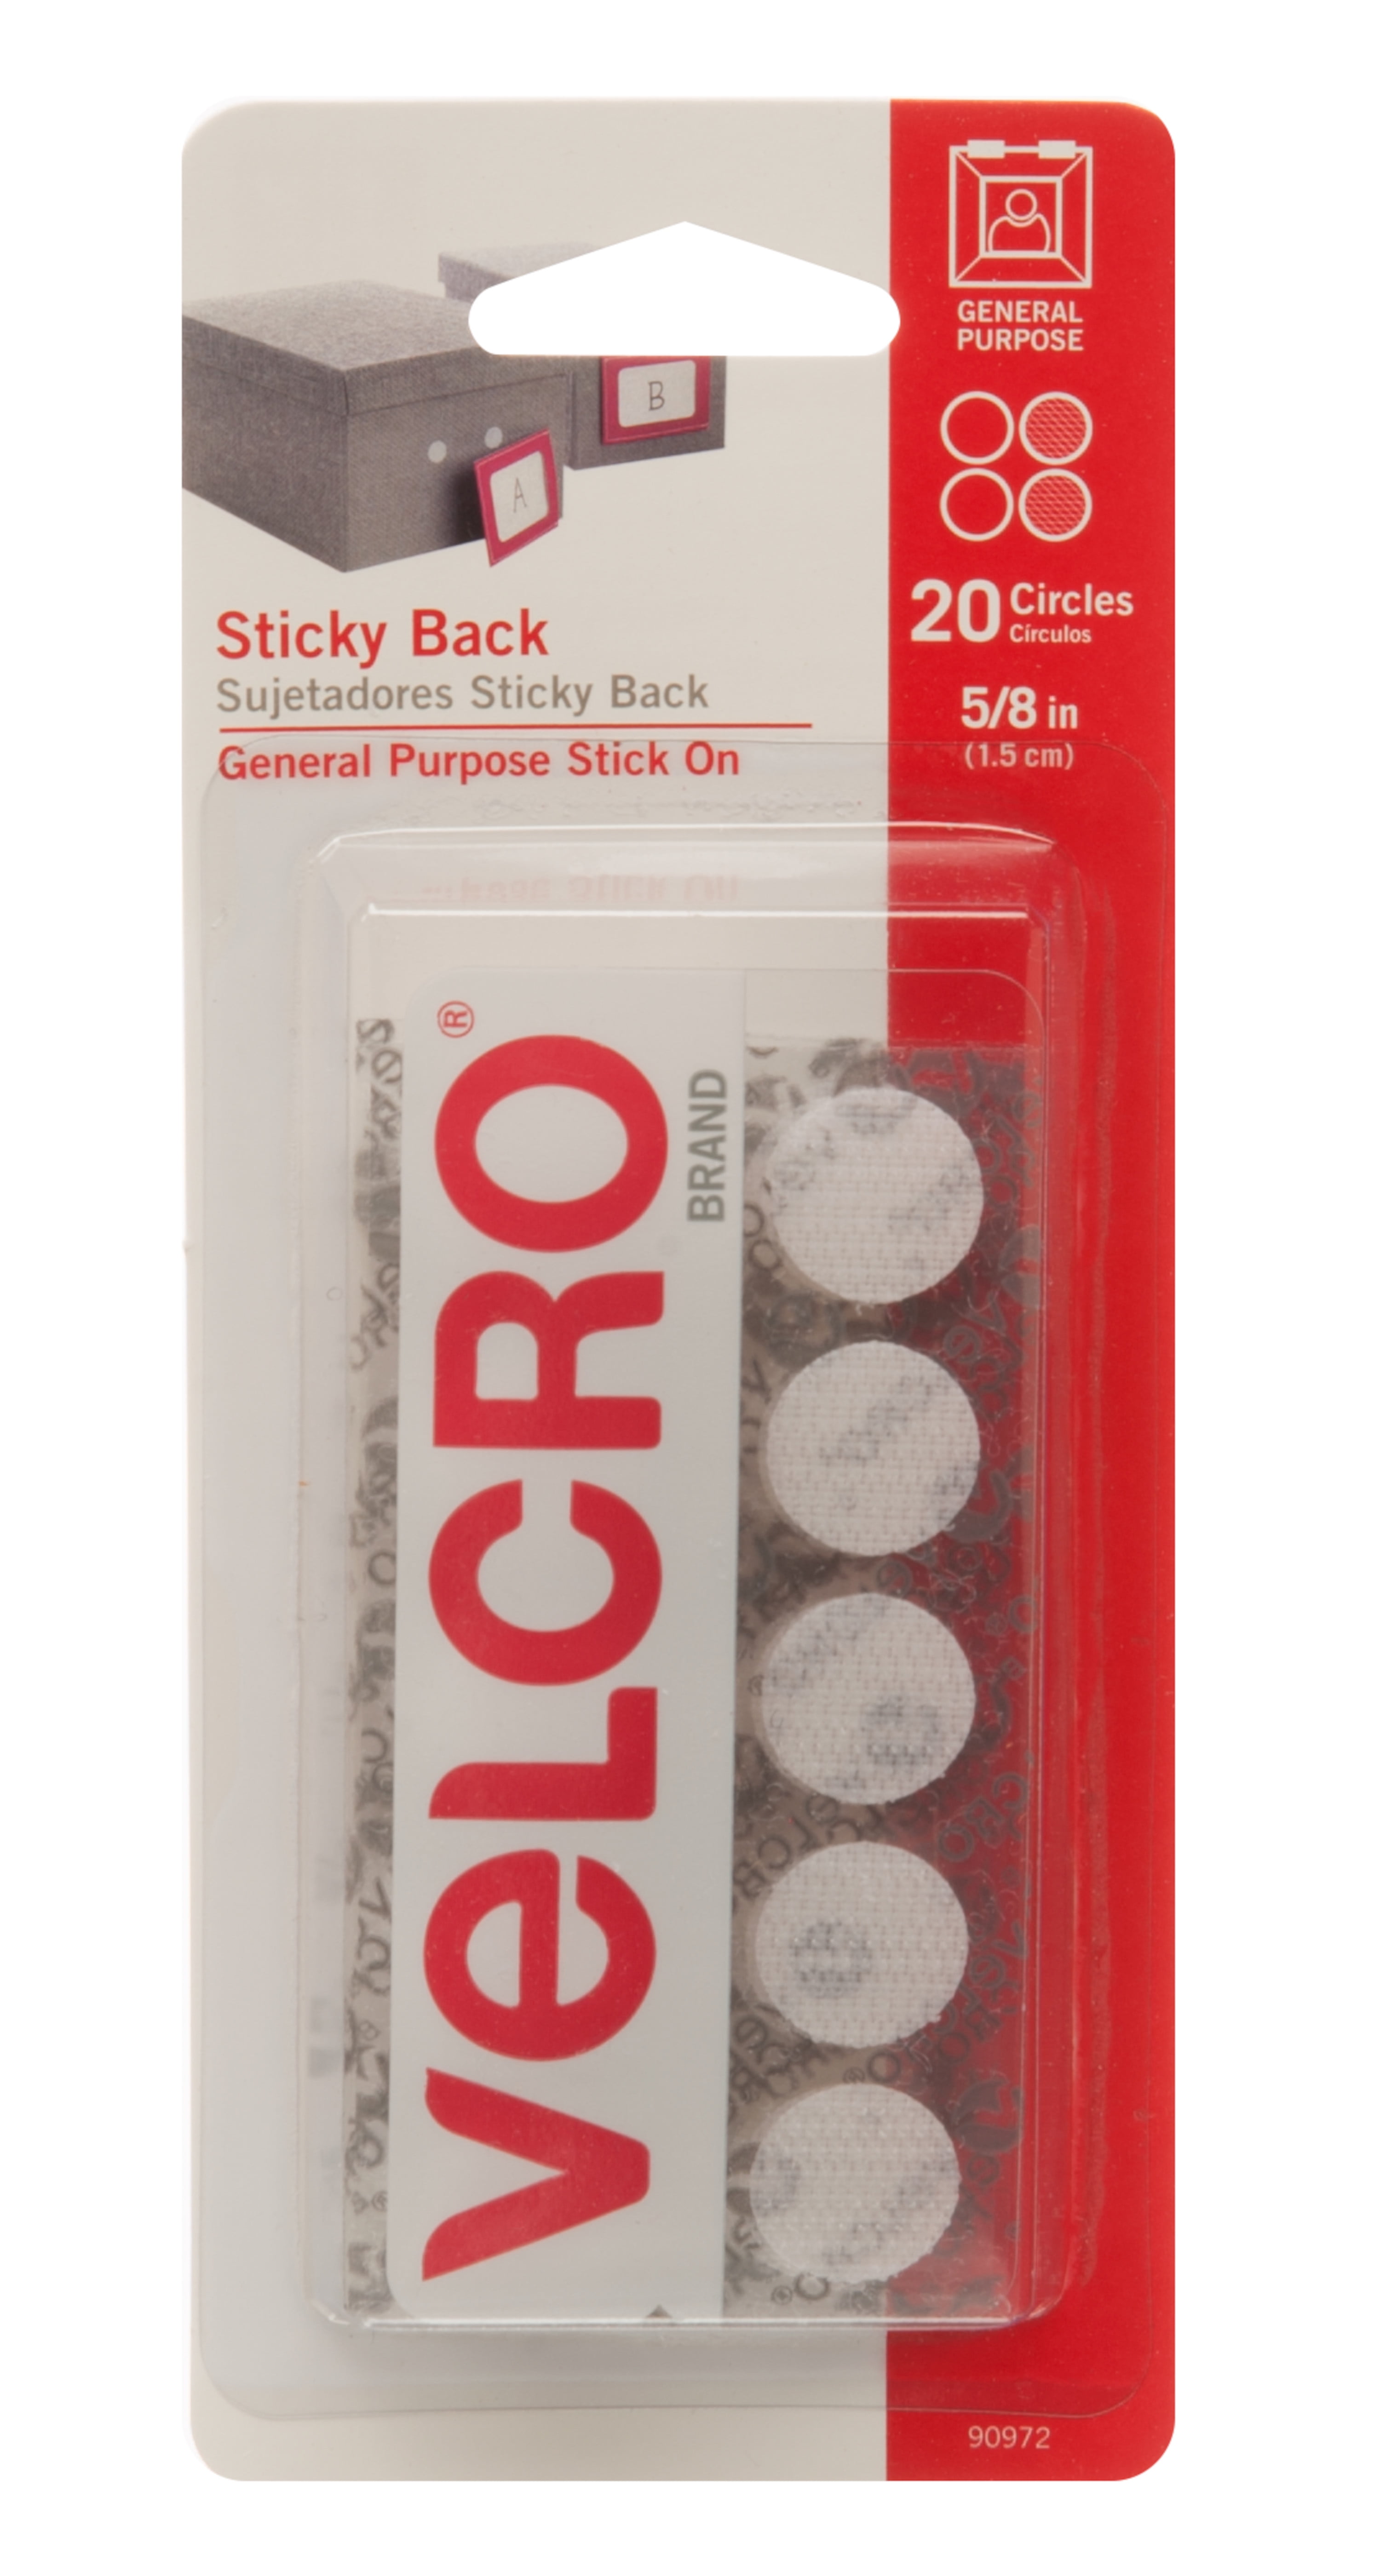 VELCRO Brand Dots with Adhesive  Sticky Back Round Hook and Loop Closures  for Organizing, Arts and Crafts, School Projects, 5/8in Circles White 20 ct  